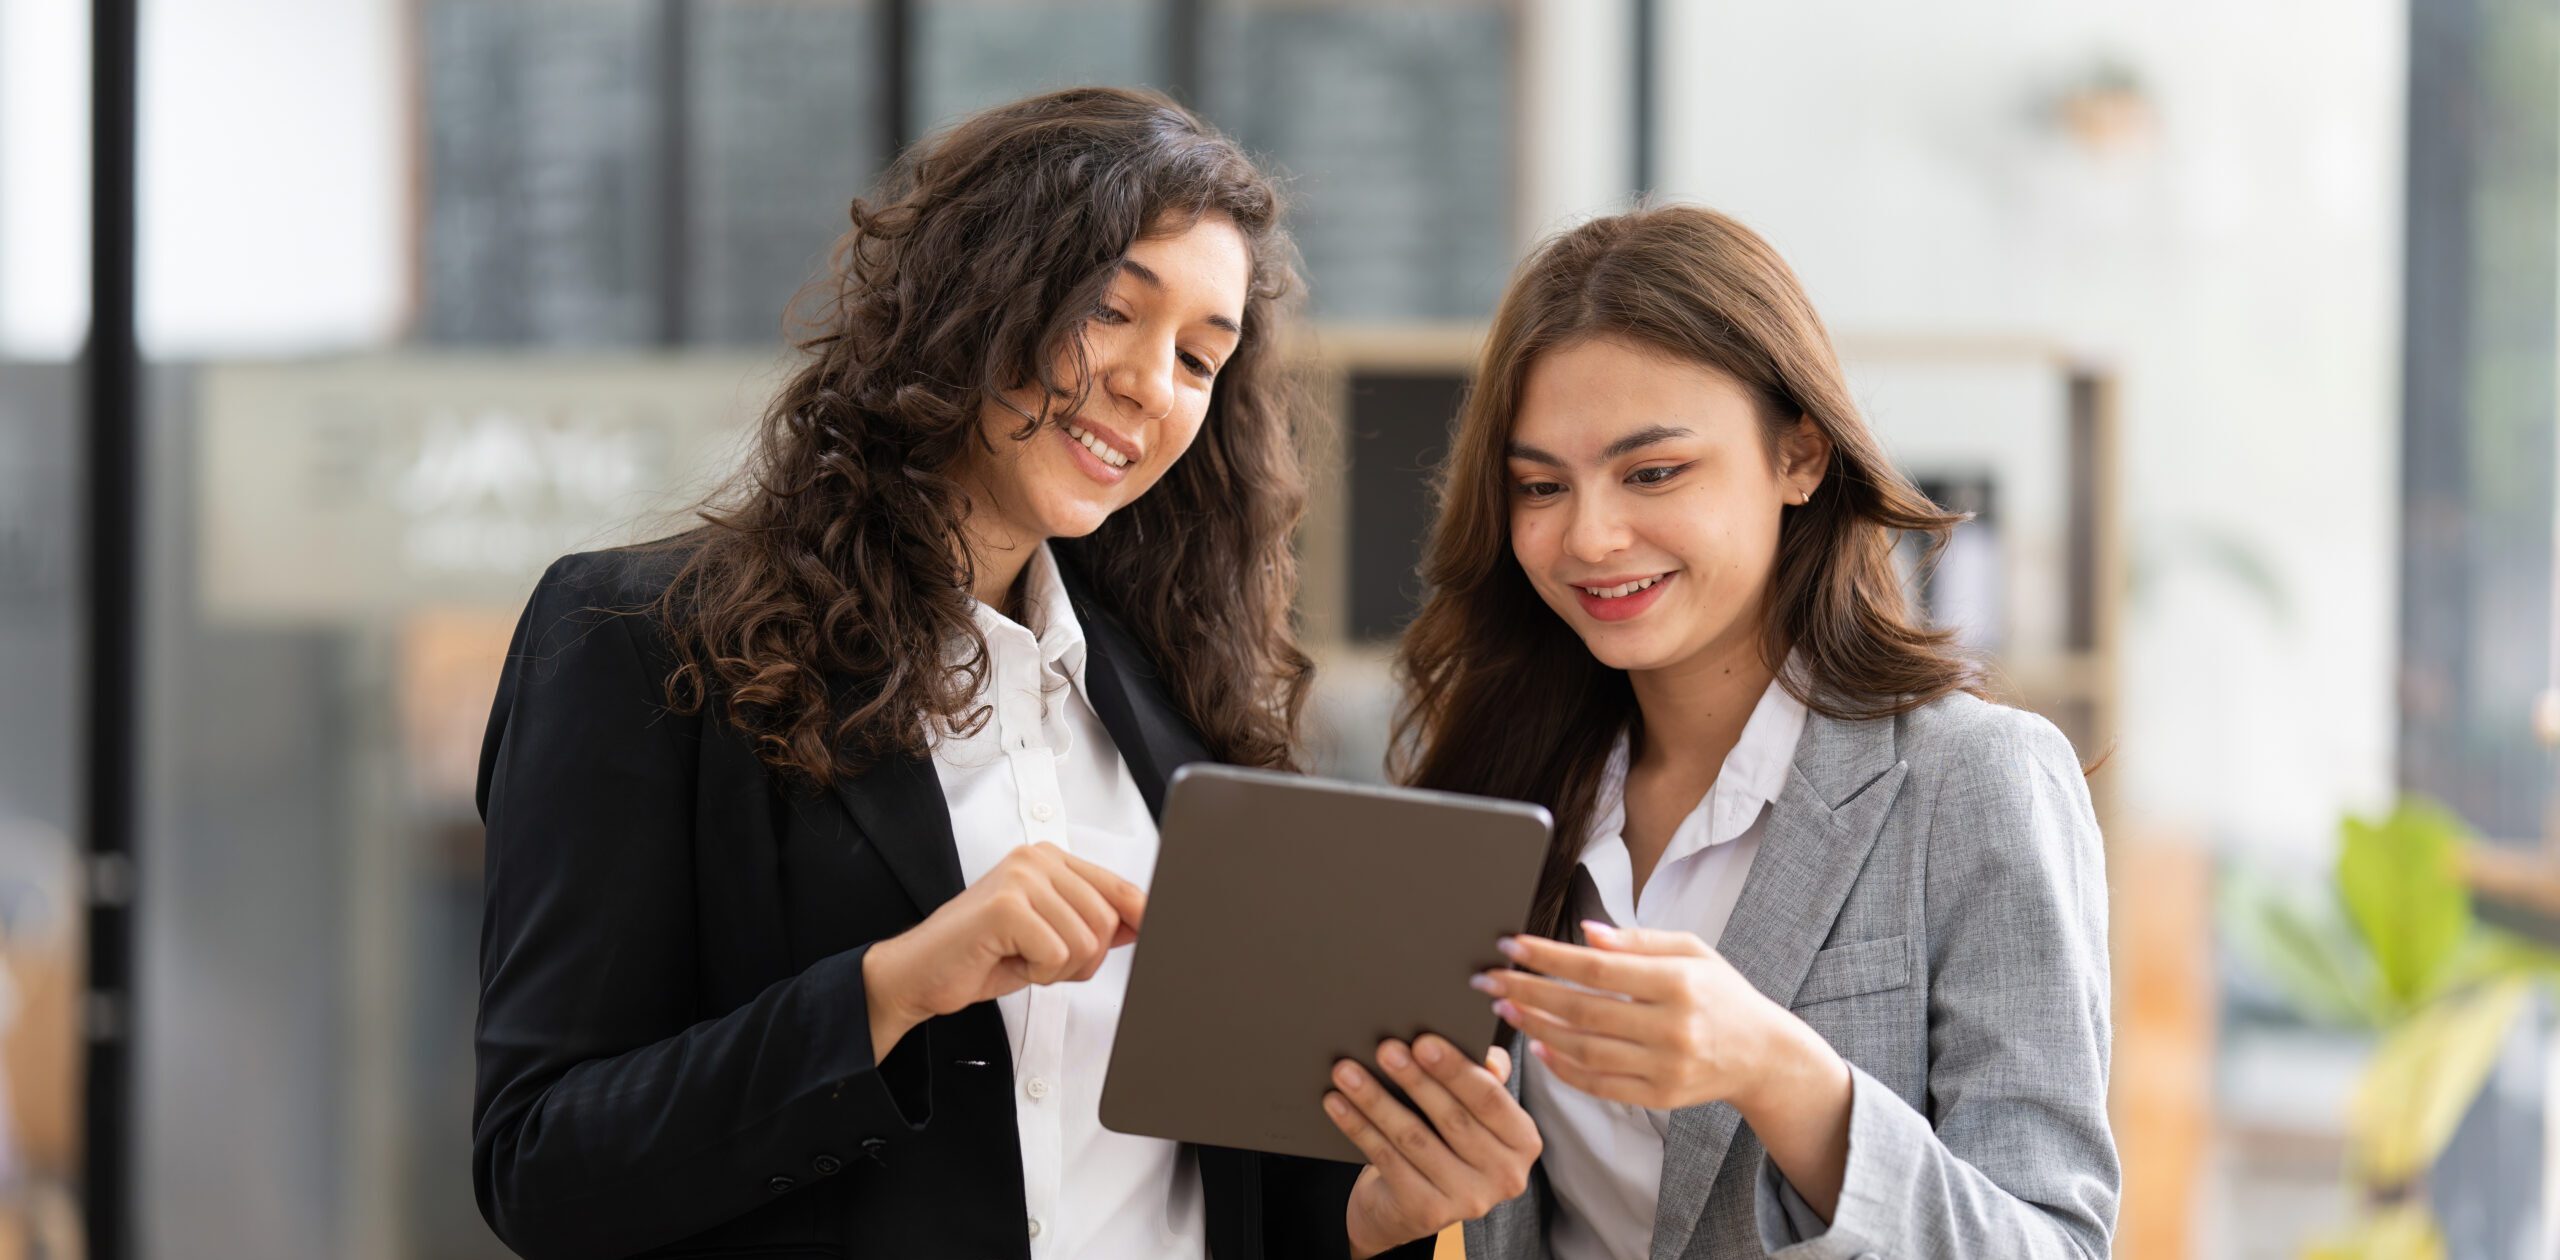 Two business women looking at an iPad